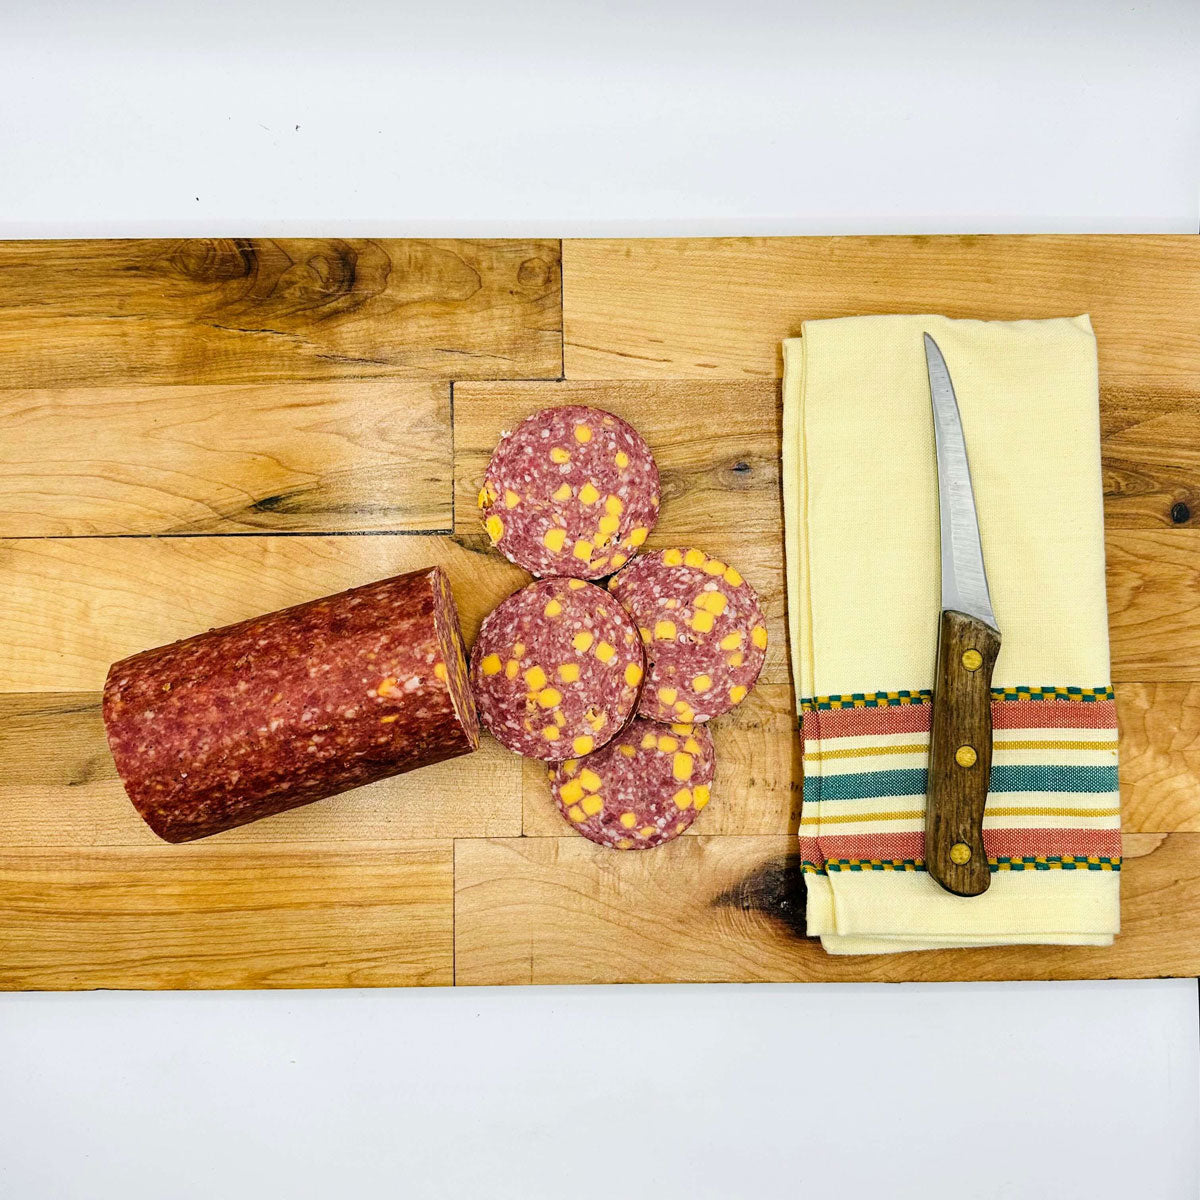 All Beef Summer Sausage next to a knife on a napkin